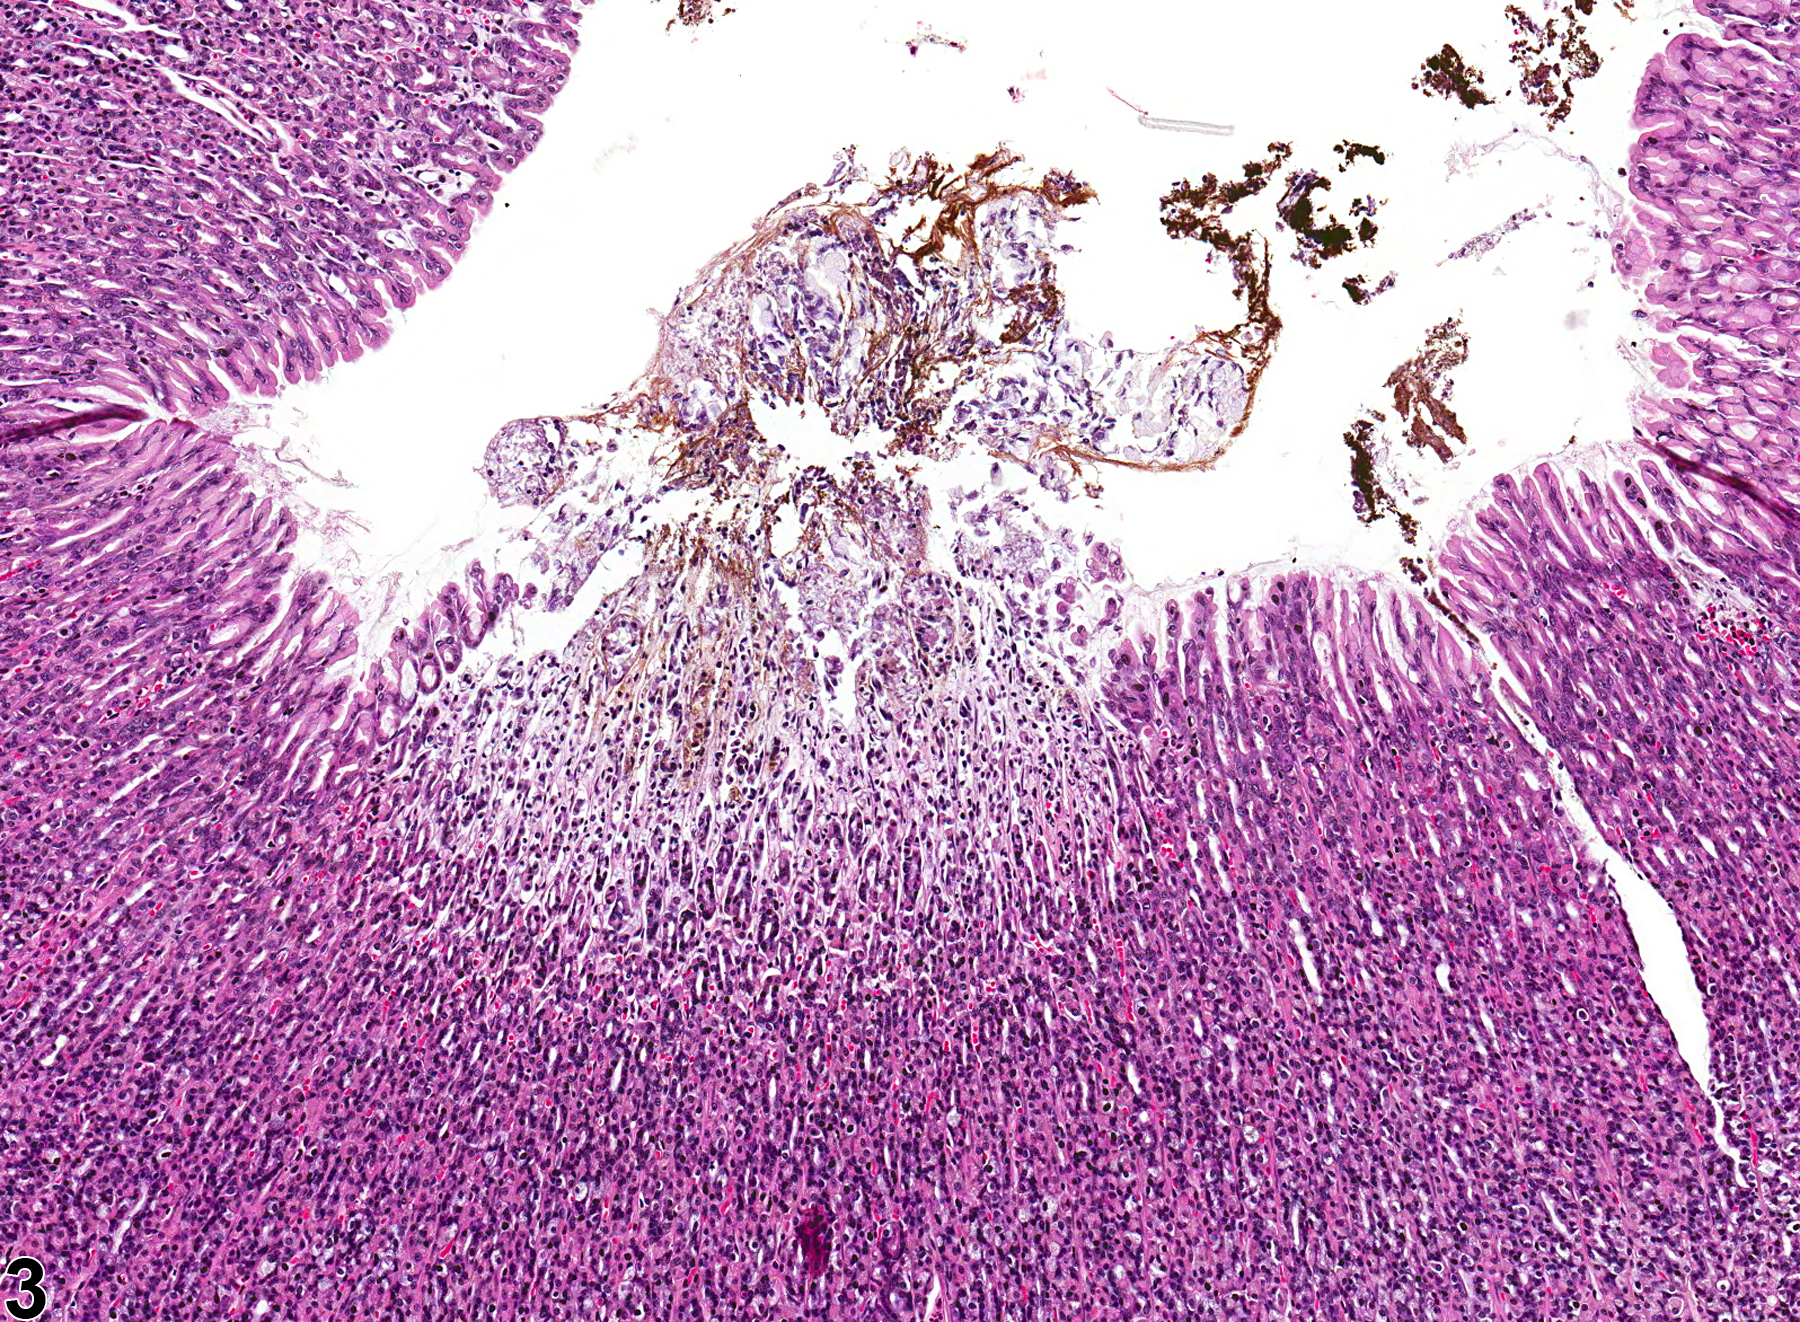 Image of pigment in the glandular stomach from a female F344/N rat in a chronic study